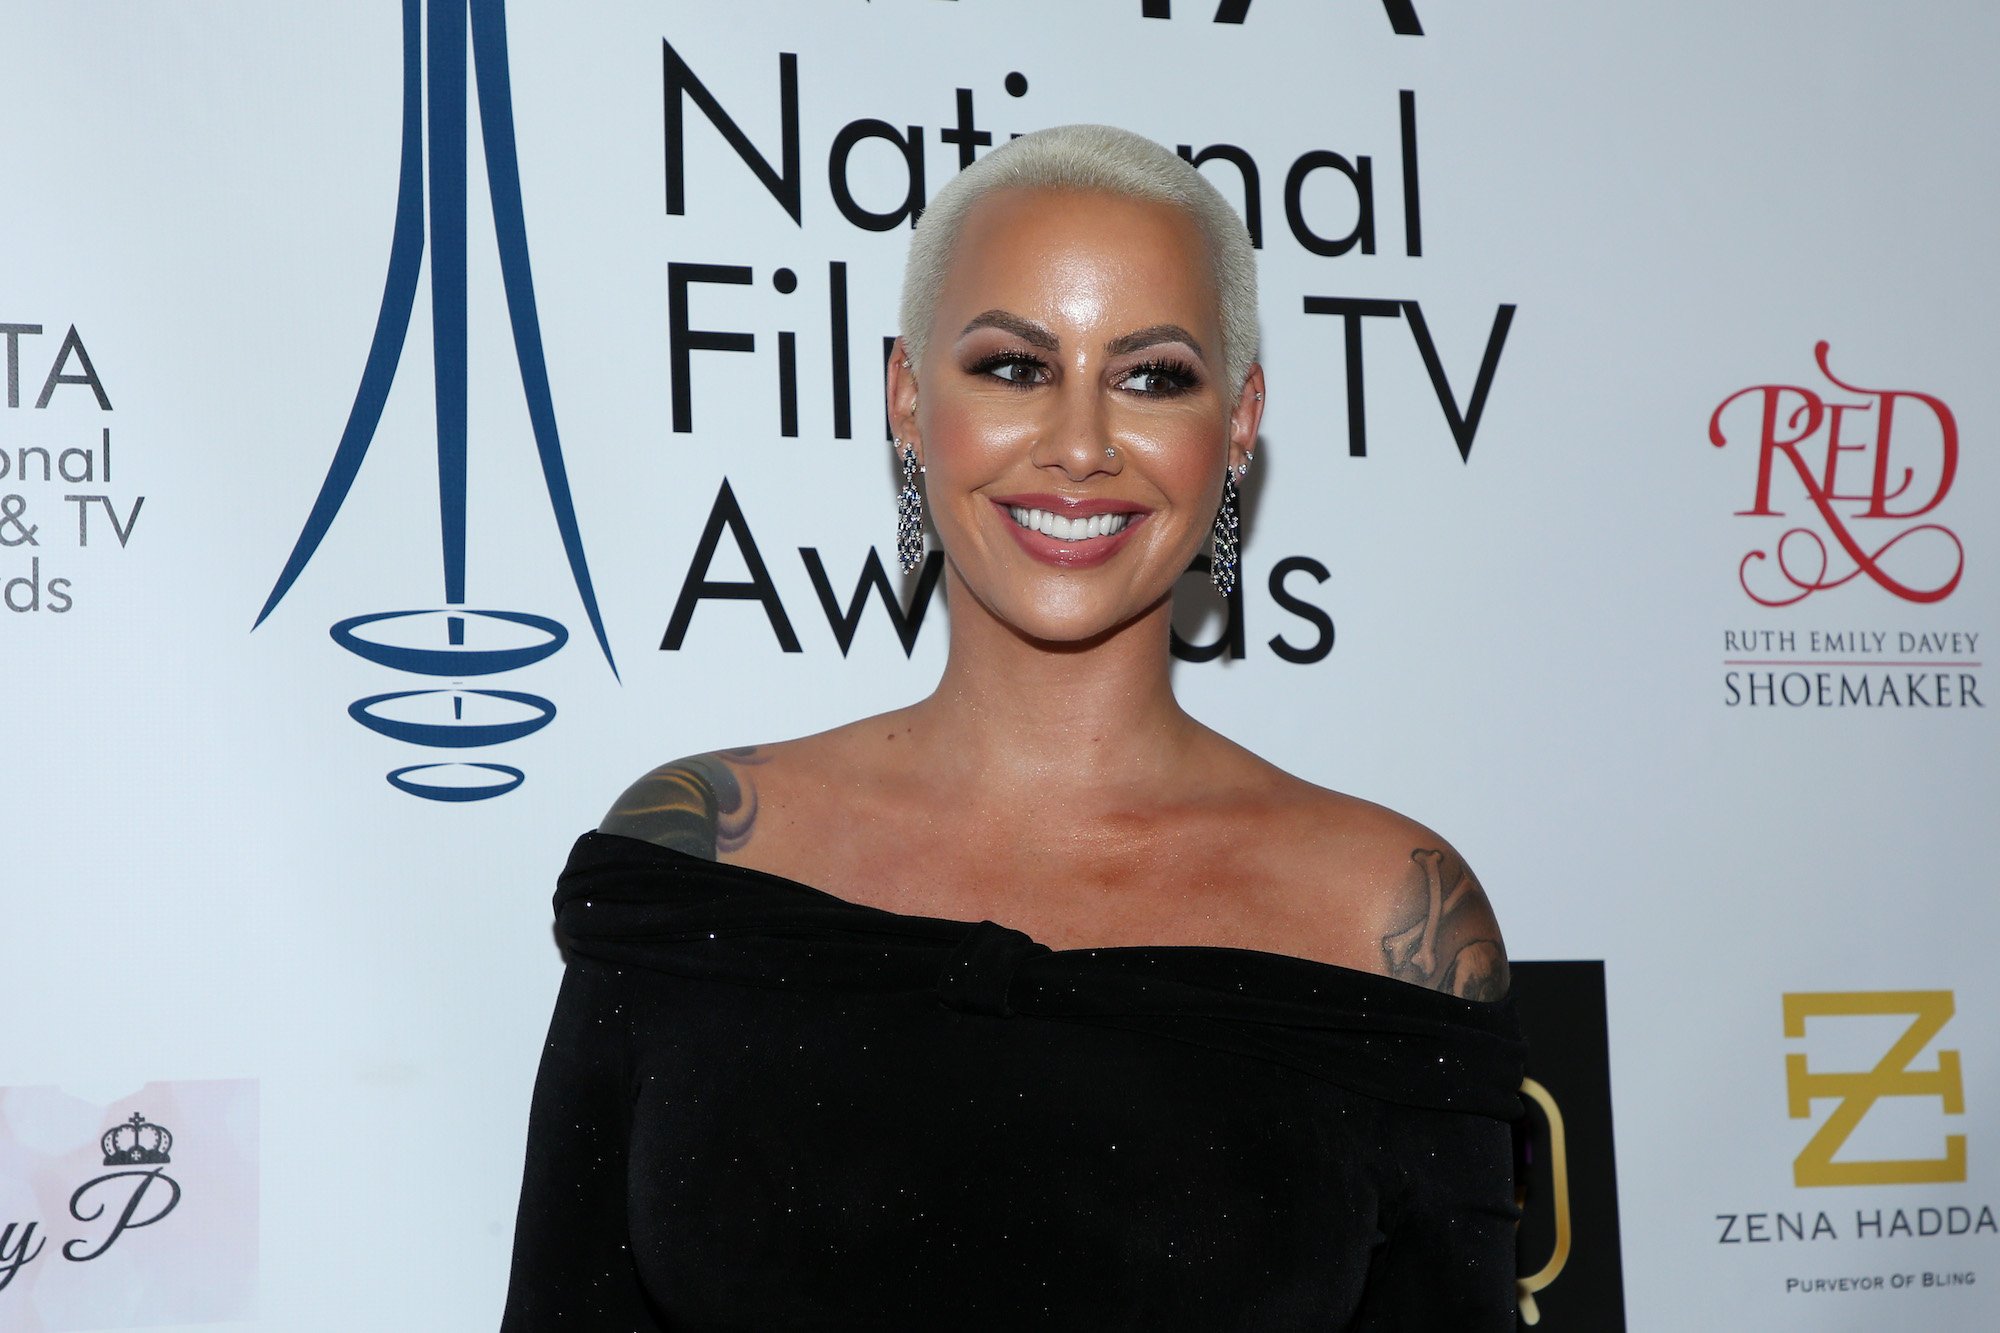 Amber Rose attending the National Film And Television Awards Ceremony in 2018